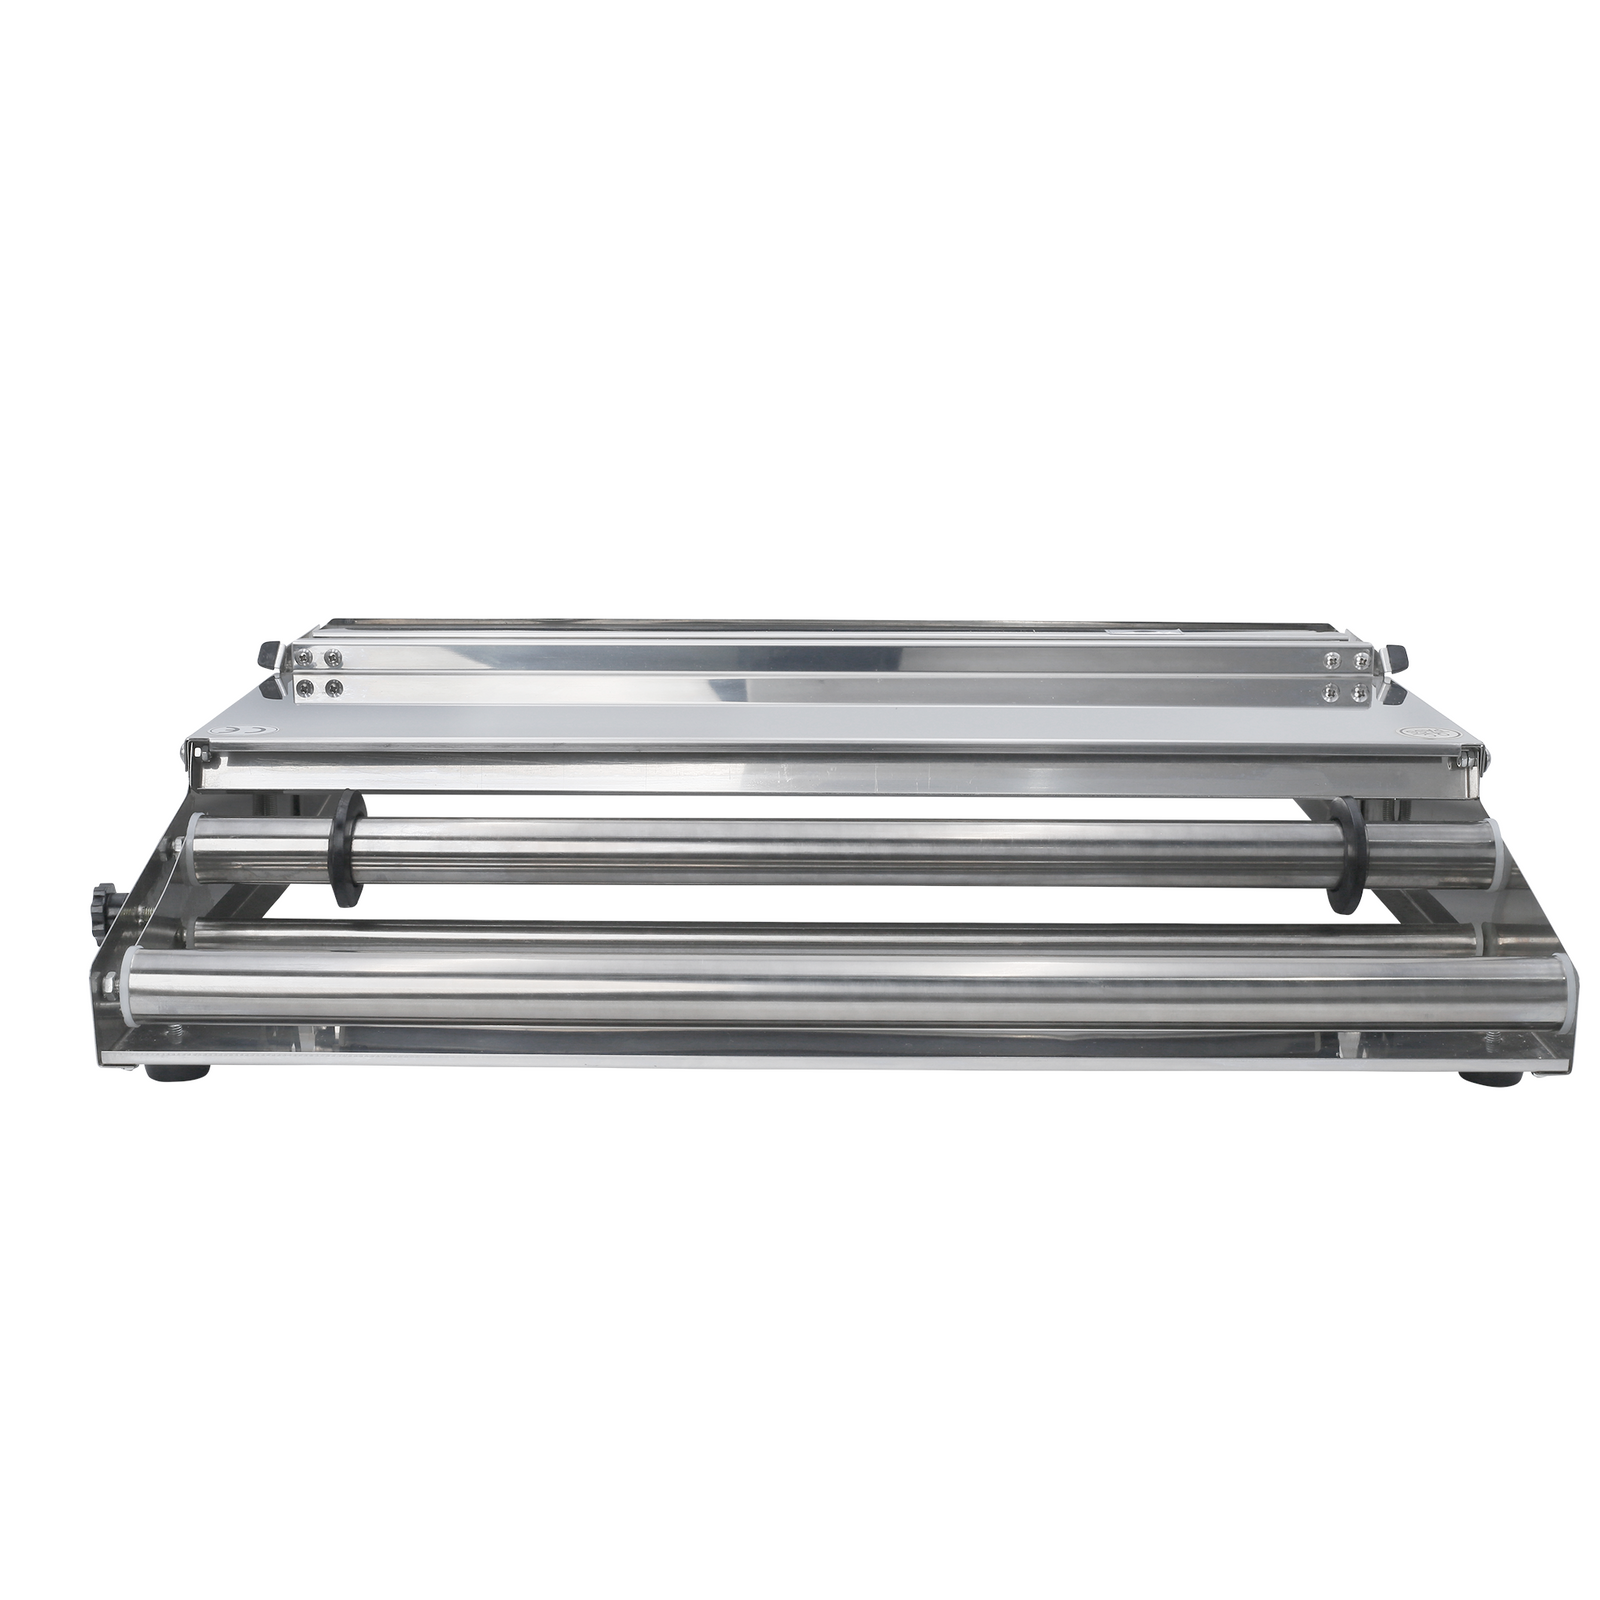 back view of the stainless steel tray wrapper sealer